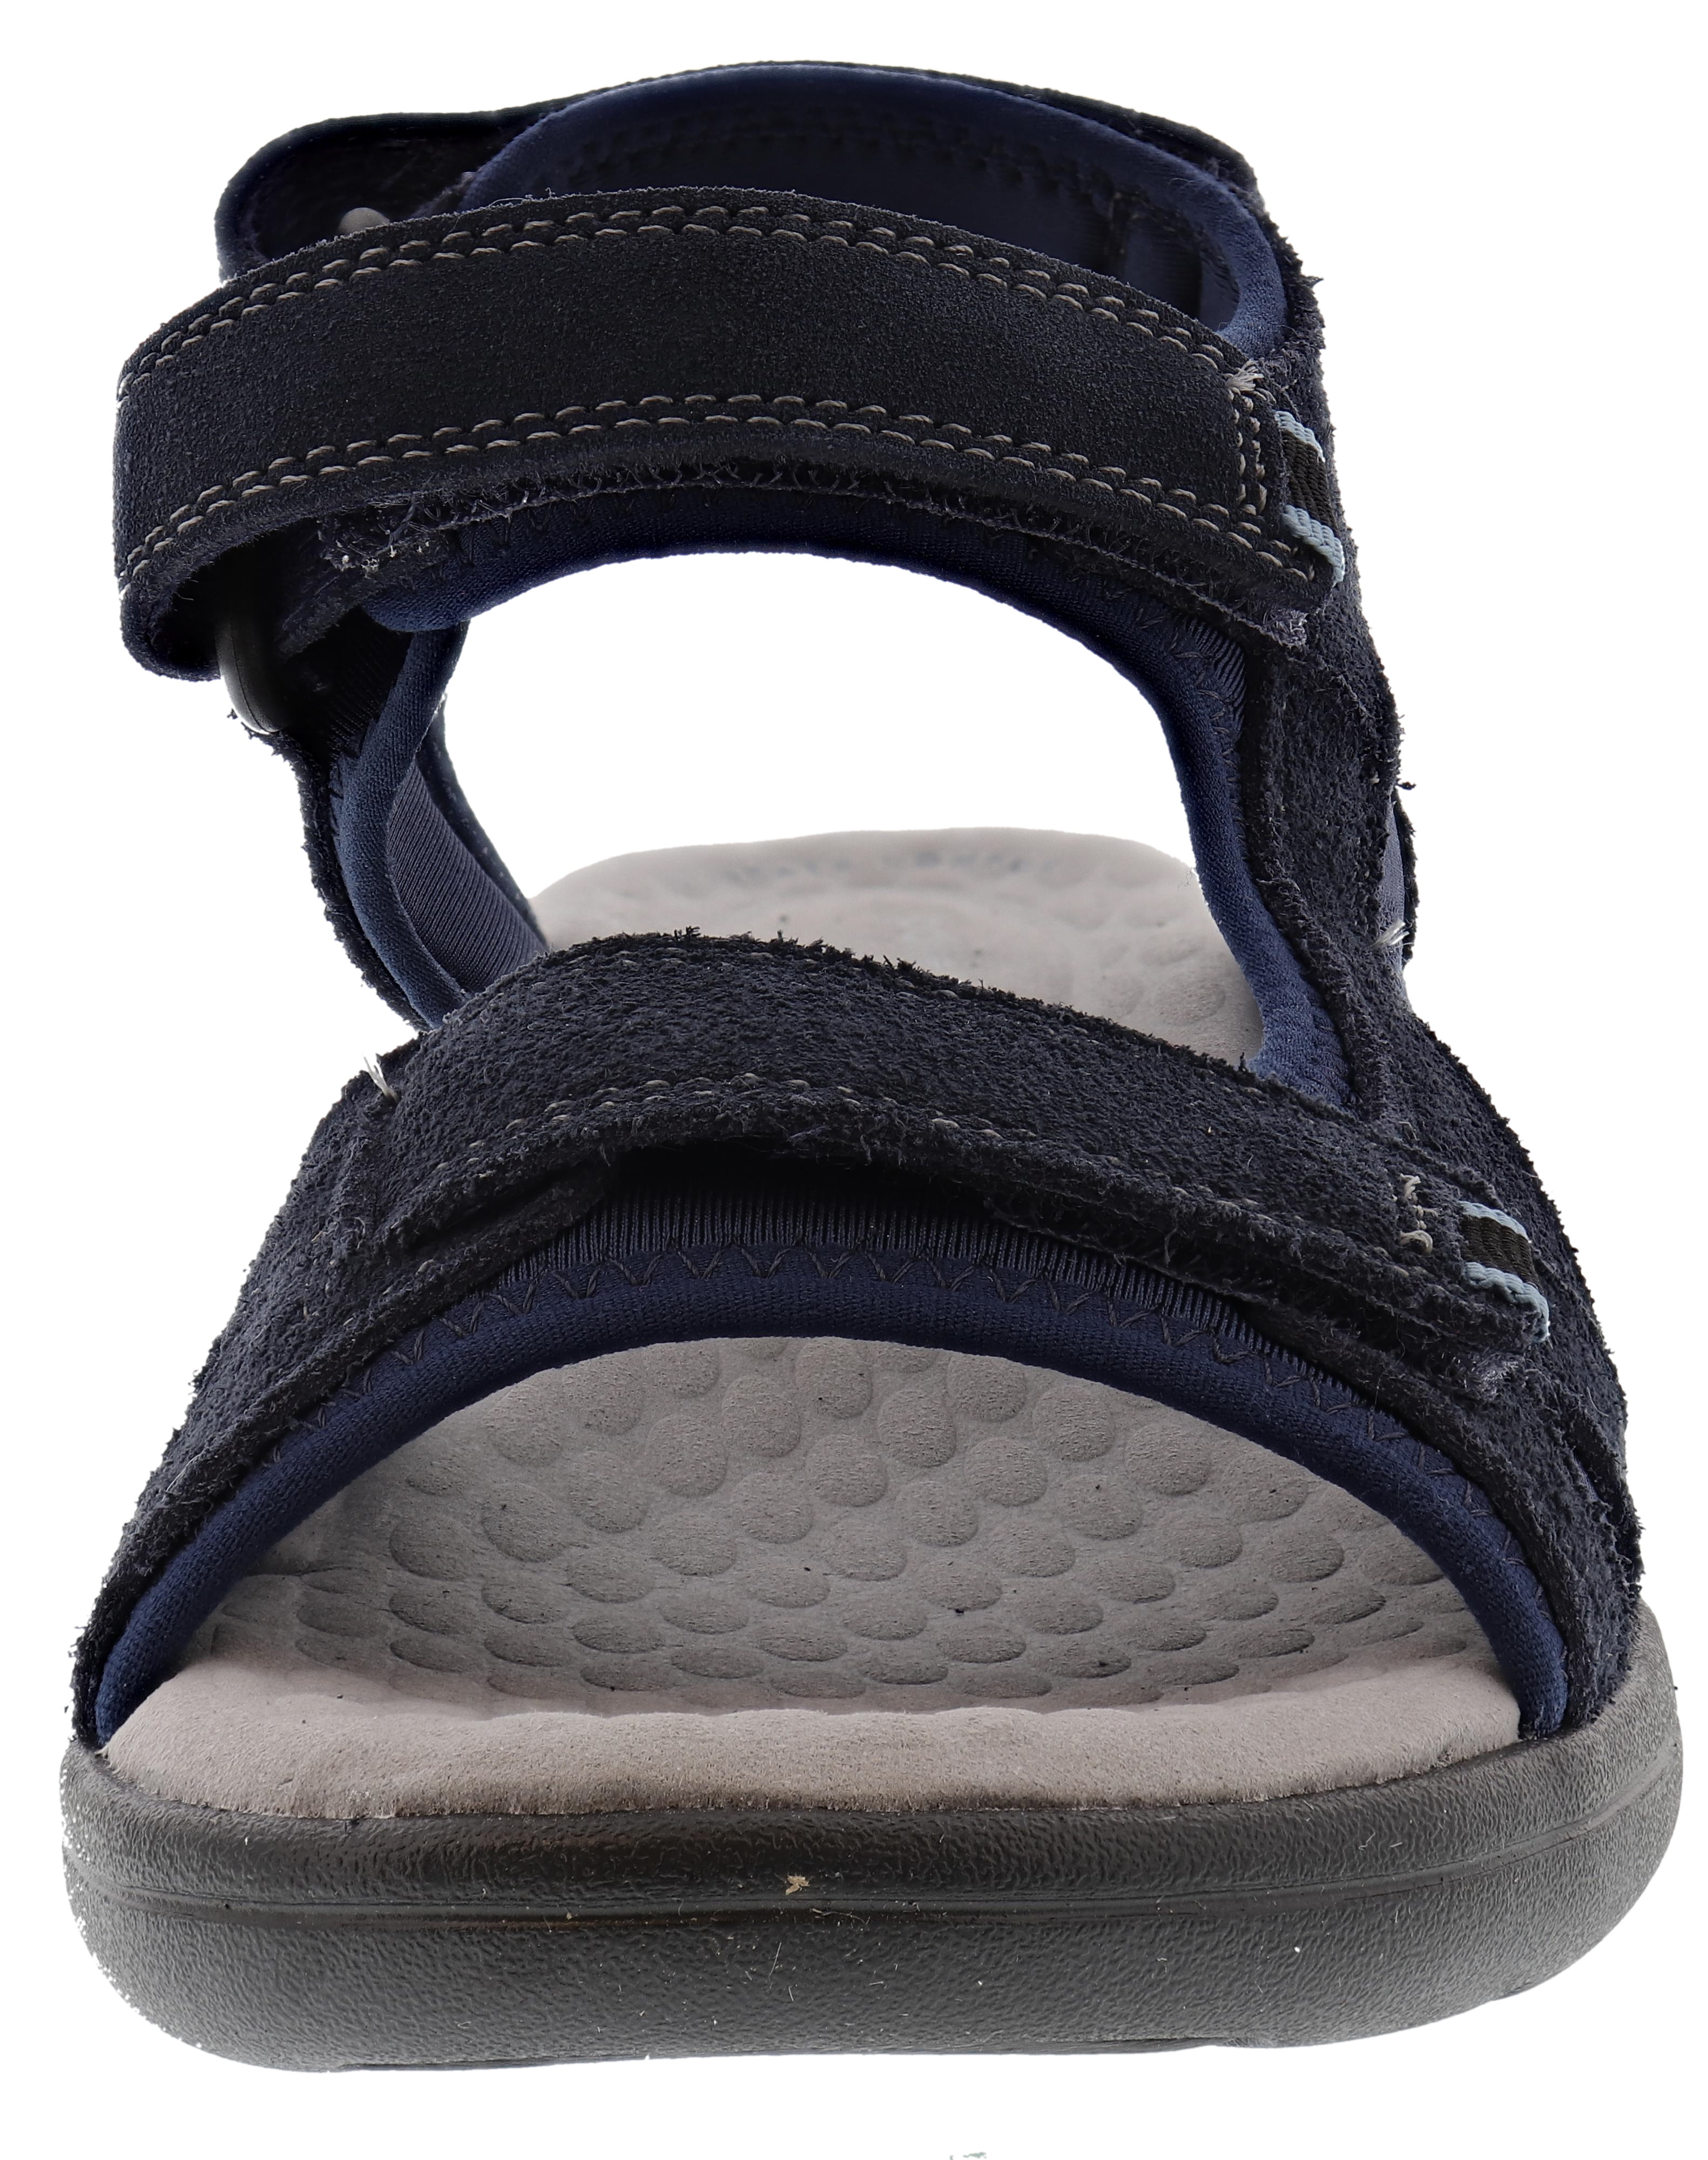 GIRLS CLARKS SURFING MOON RIPTAPE CASUAL SPORTS BEACH BABY SUMMER SANDALS SIZE 